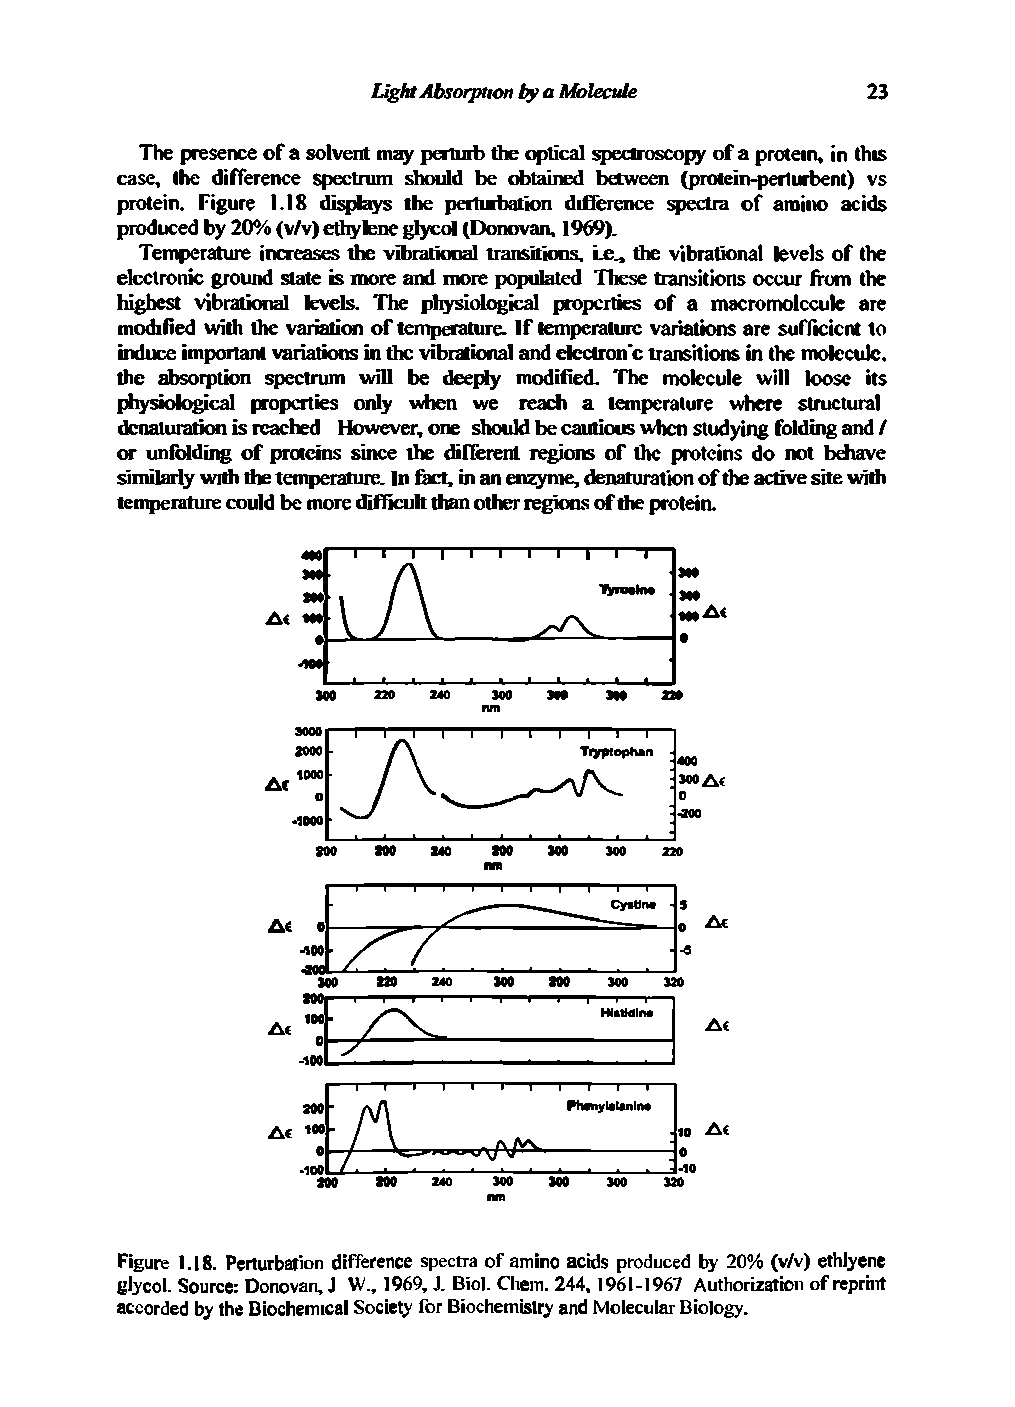 Figure 1.18. Perturbation difference spectra of amino acids produced by 20% (v/v) ethlyene glycol. Source Donovan, W., 1969, J. Biol. Cliem. 244,1961-1967 Authorizatbn of reprint accorded by the Biochemical Society for Biochemistry and Molecular Biology.